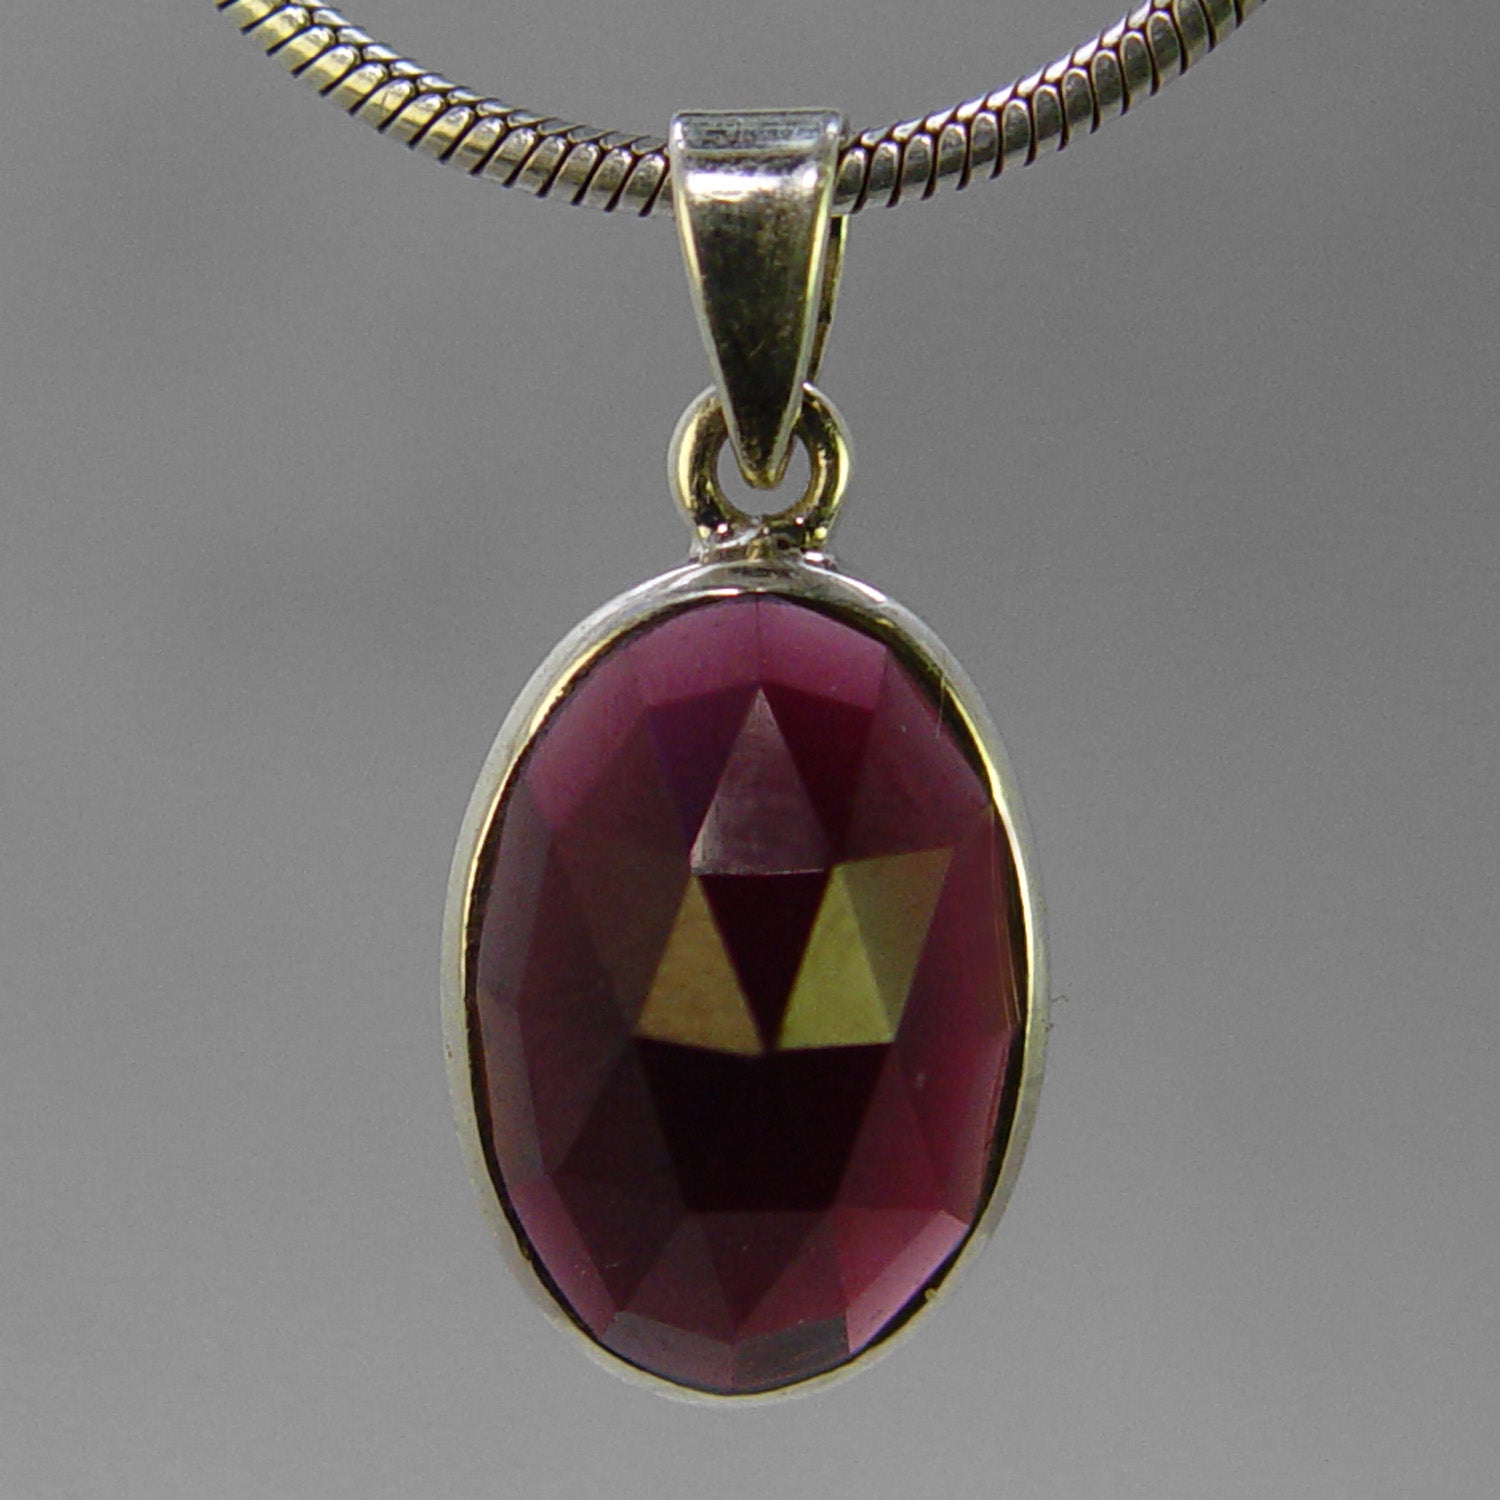 Garnet 8.0 ct Faceted Oval Sterling Silver Pendant